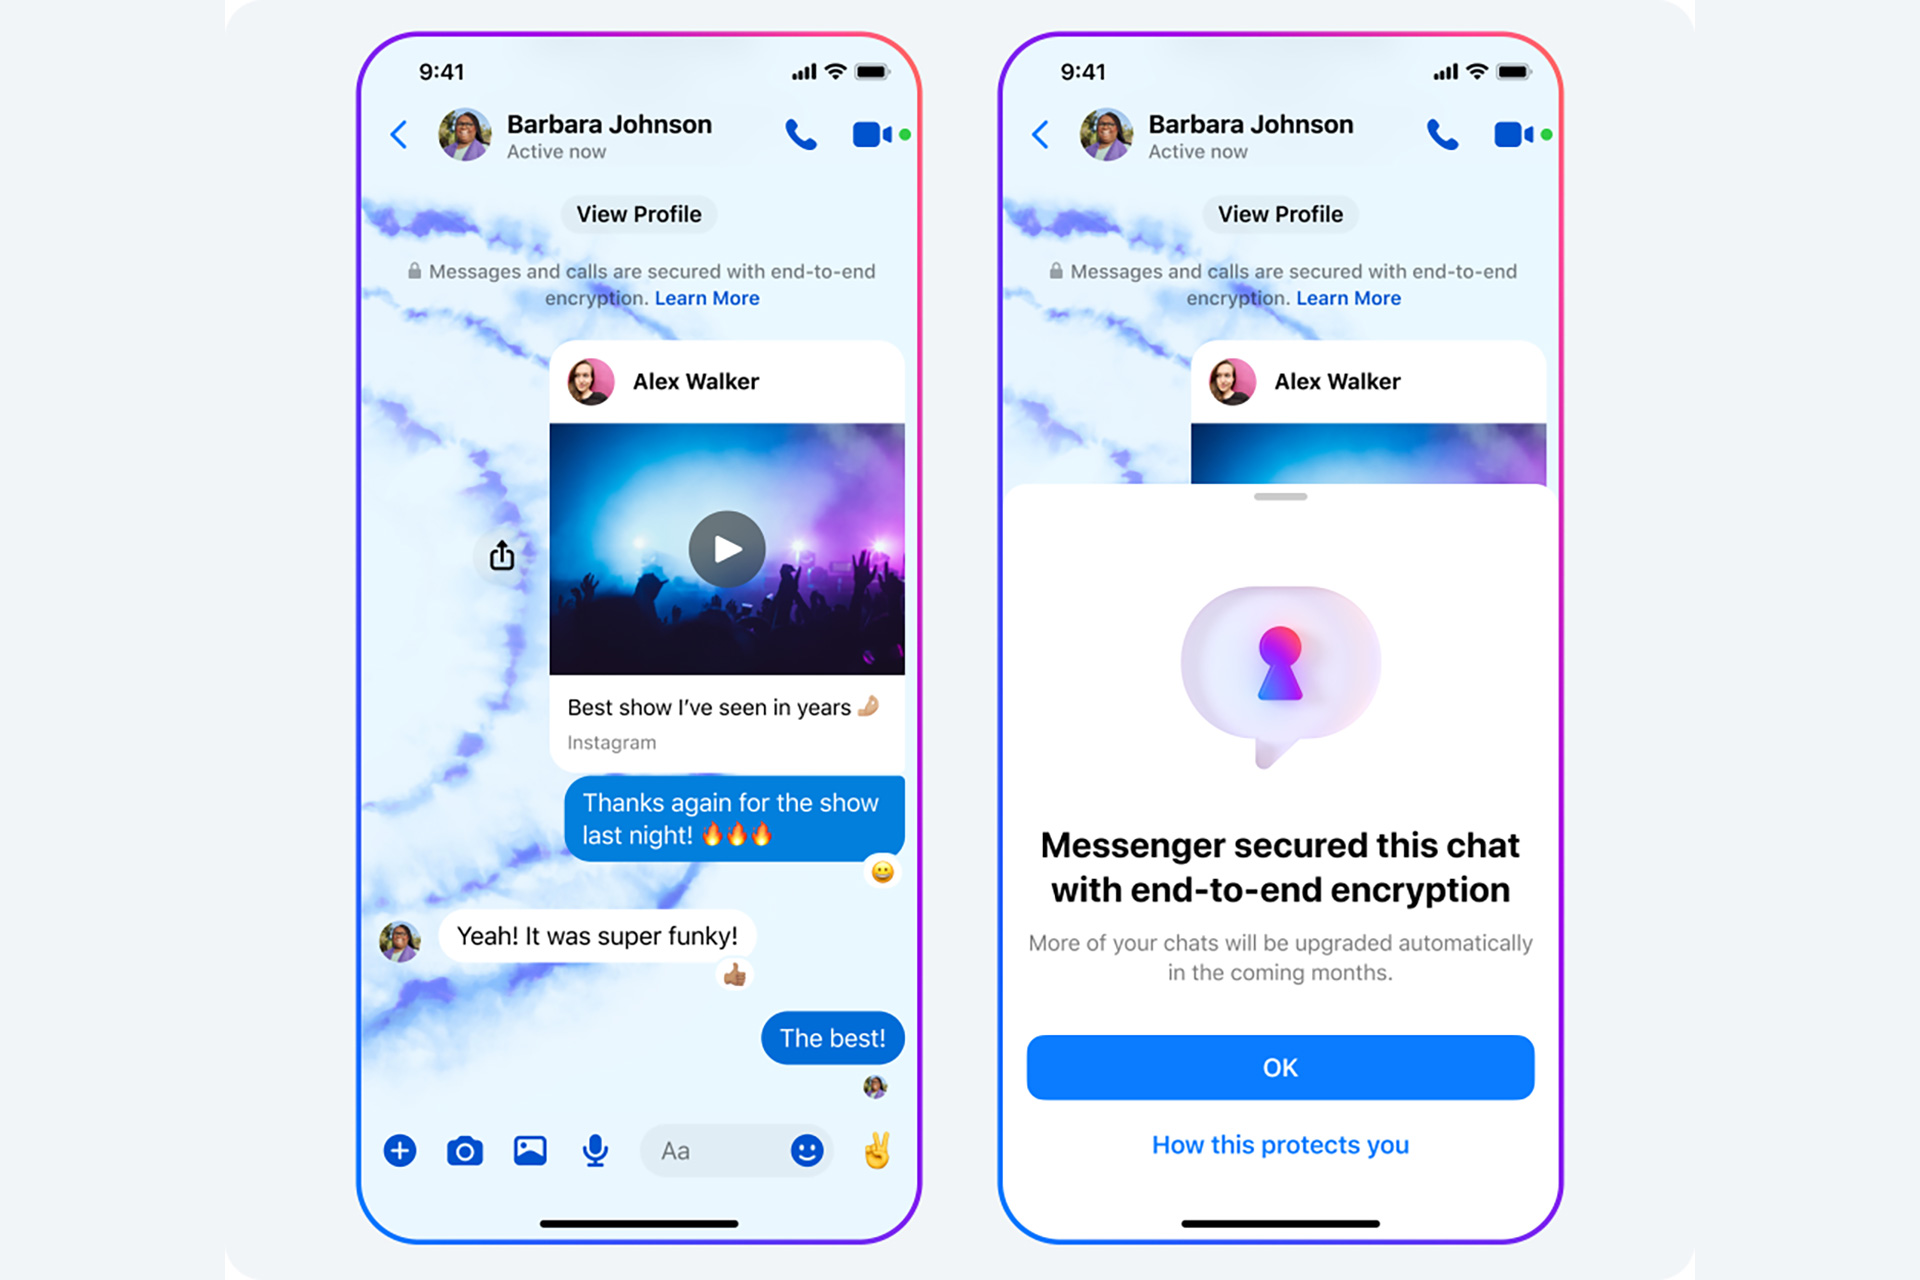 Facebook Messenger encrypted chats now include more of the features you expect